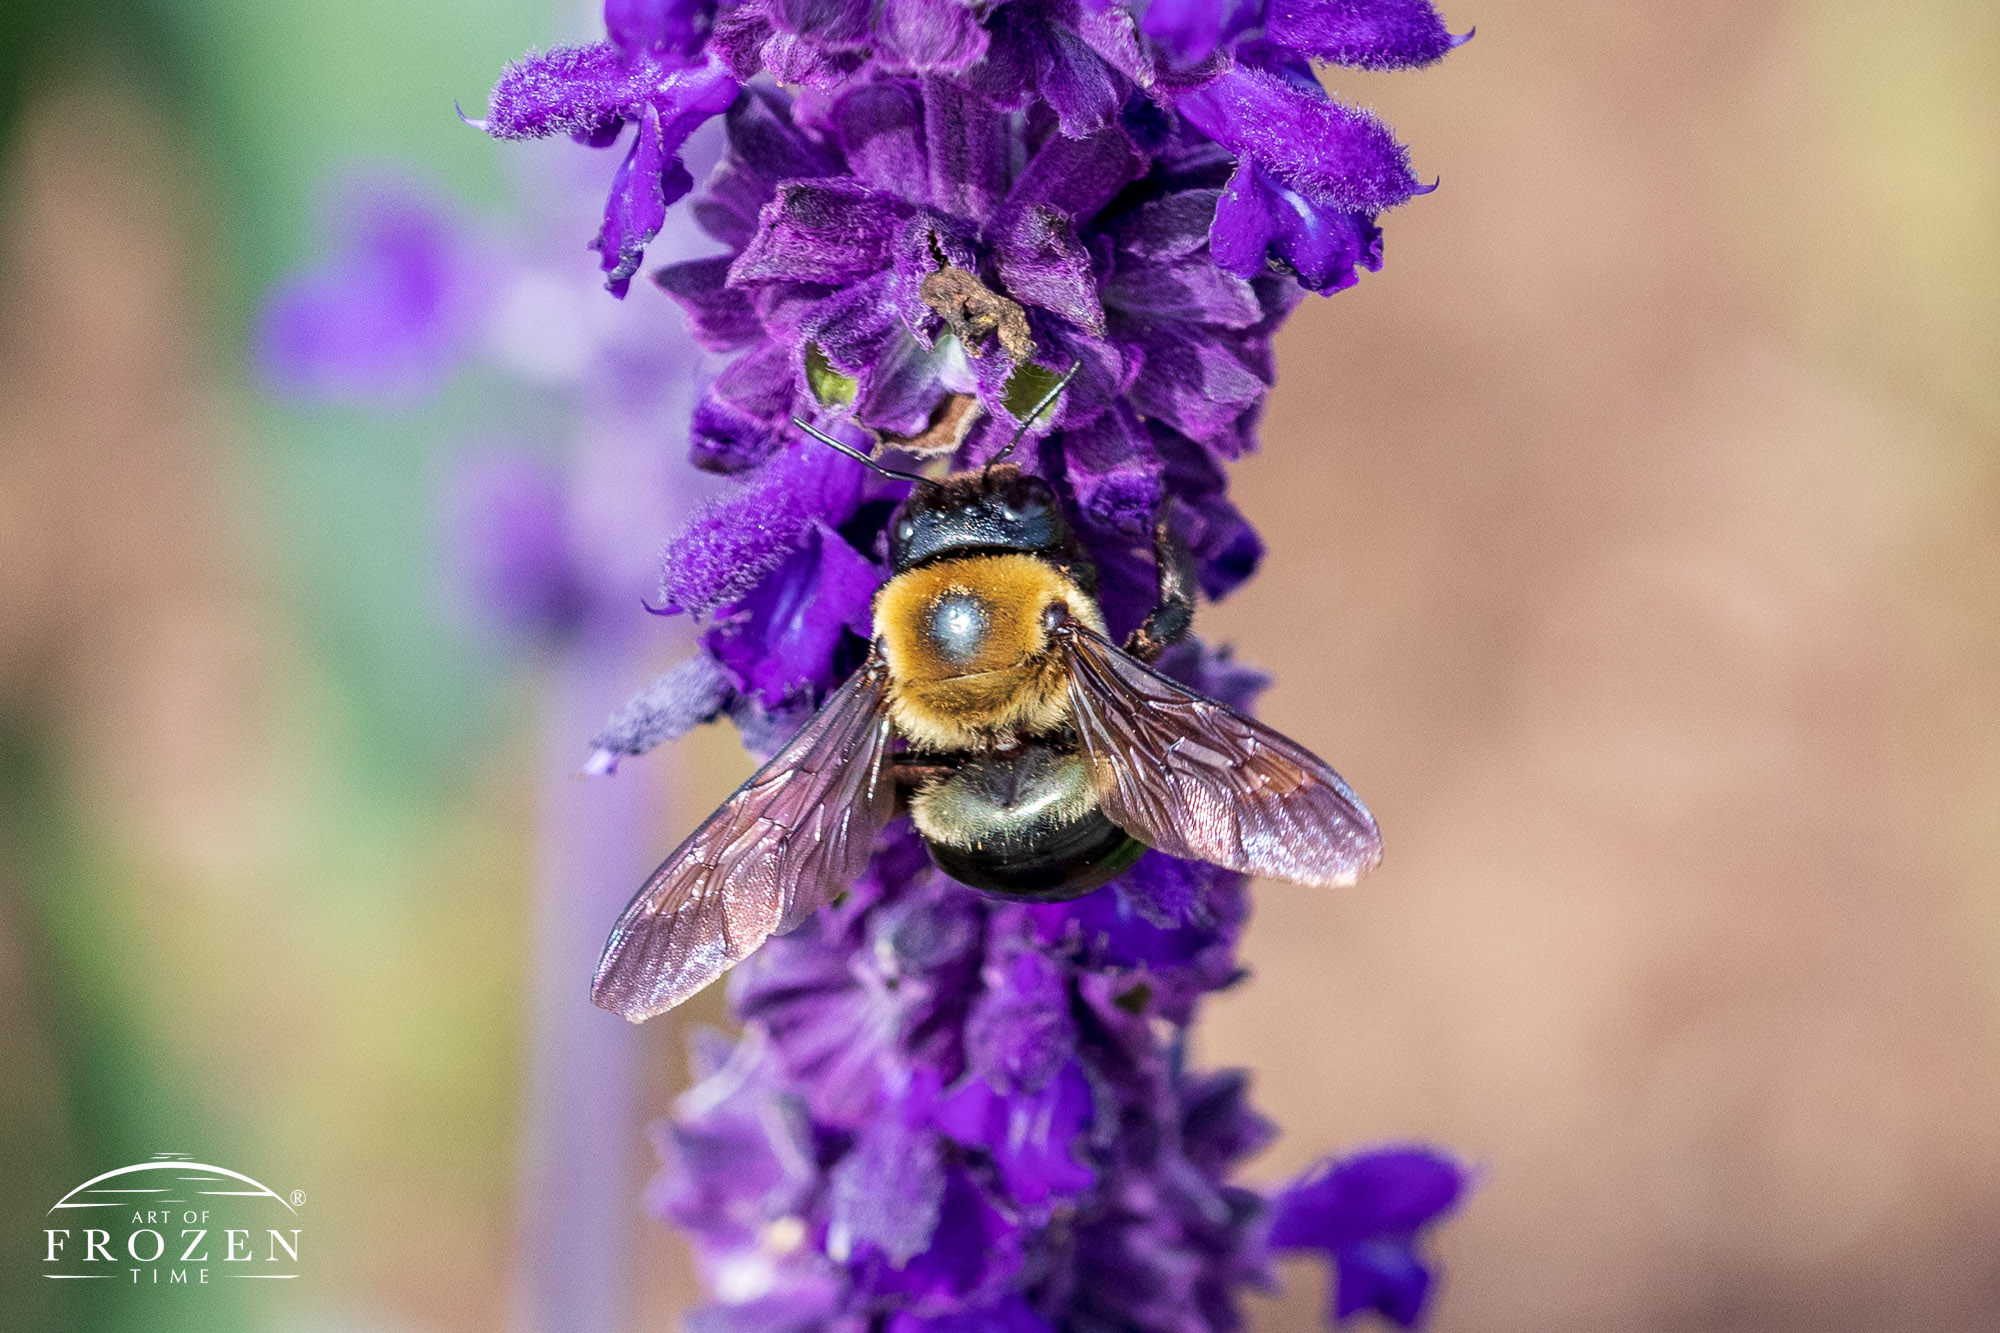 A close up image of a Carpenter Bee pollinating a Blue Salvia in bright sunlight